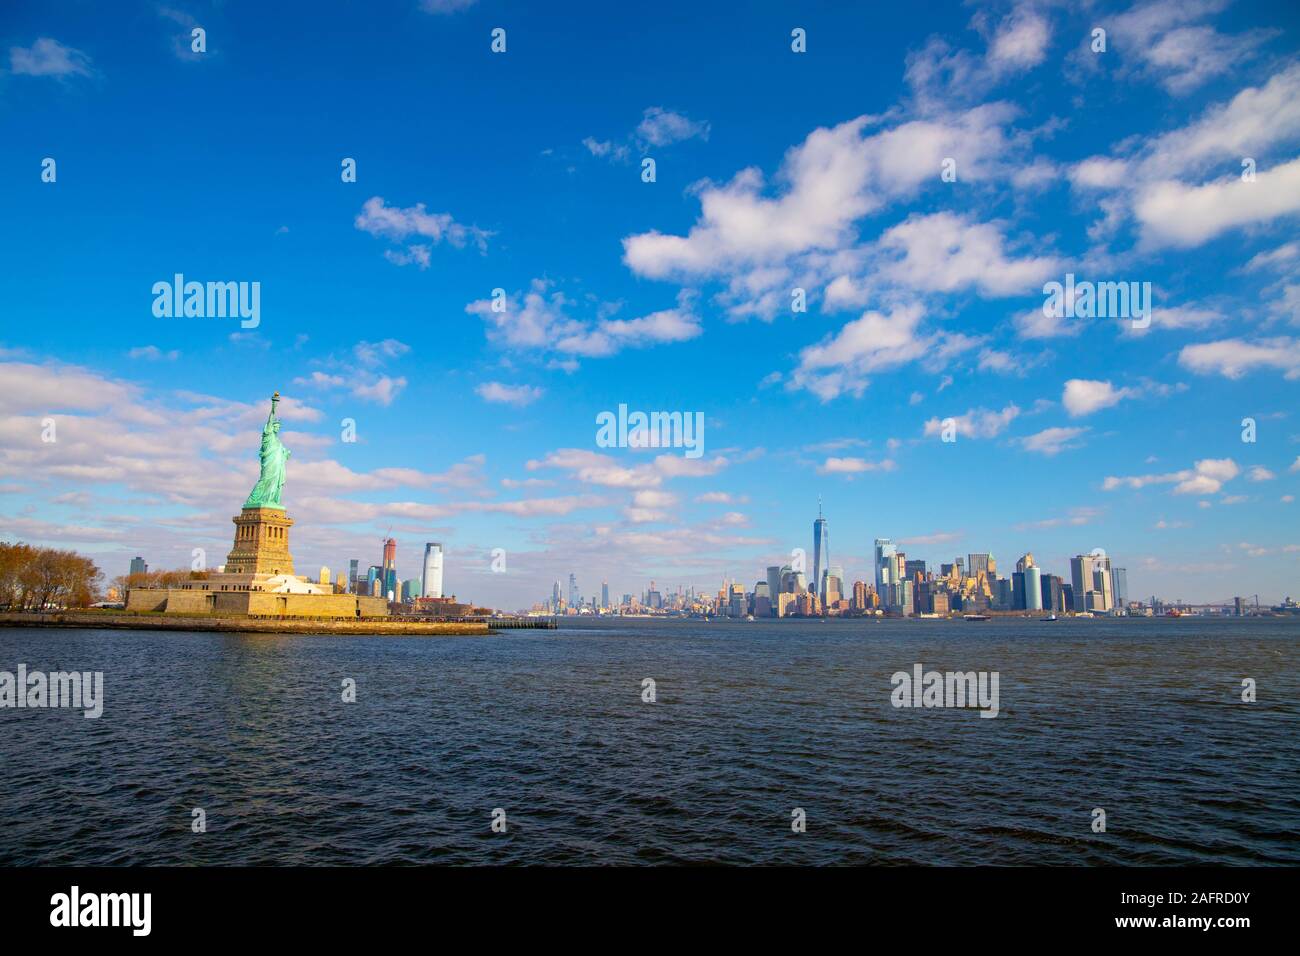 Statue of Liberty and New York Skyline isolated on the blue sky with white clouds. October 11,2018 Stock Photo